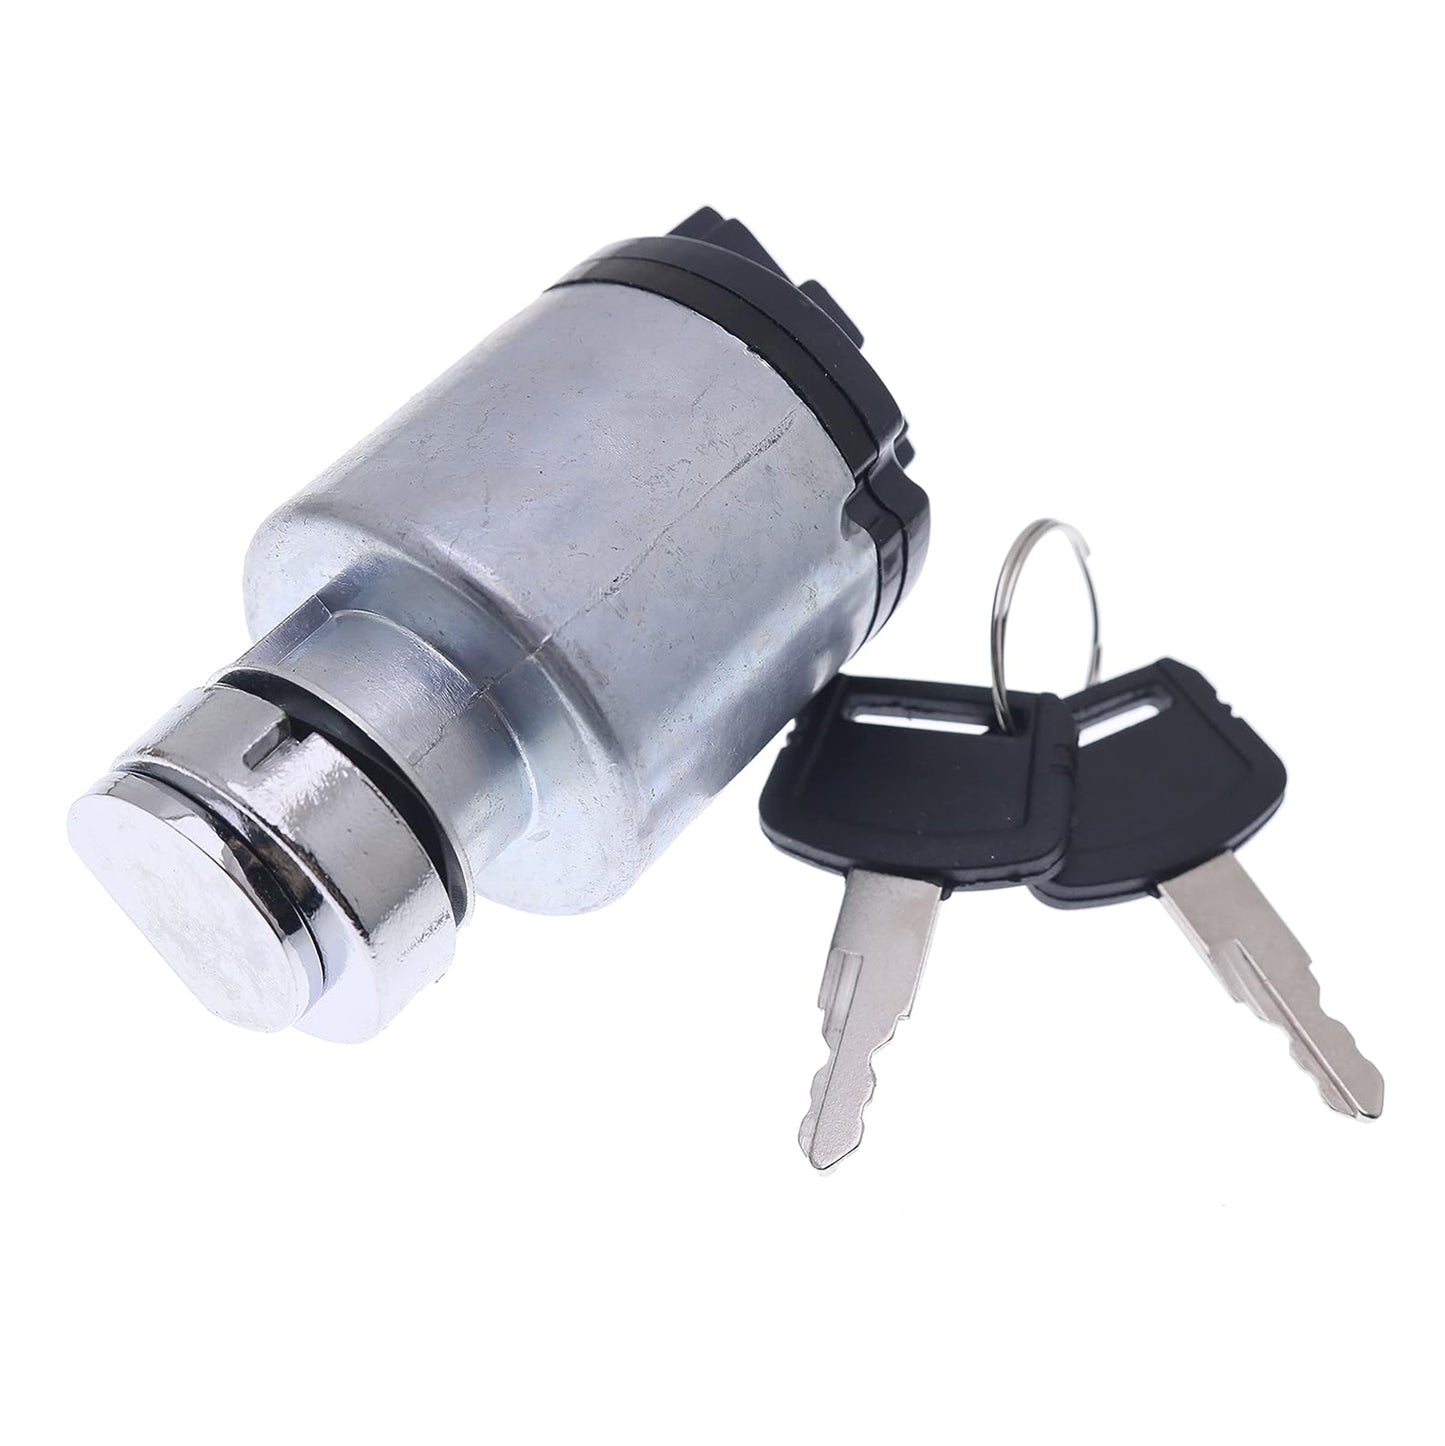 AT154992 Ignition Switch Compatible with Hitachi EX60-3 EX100-3 EX120-3 EX200-2 EX200-3